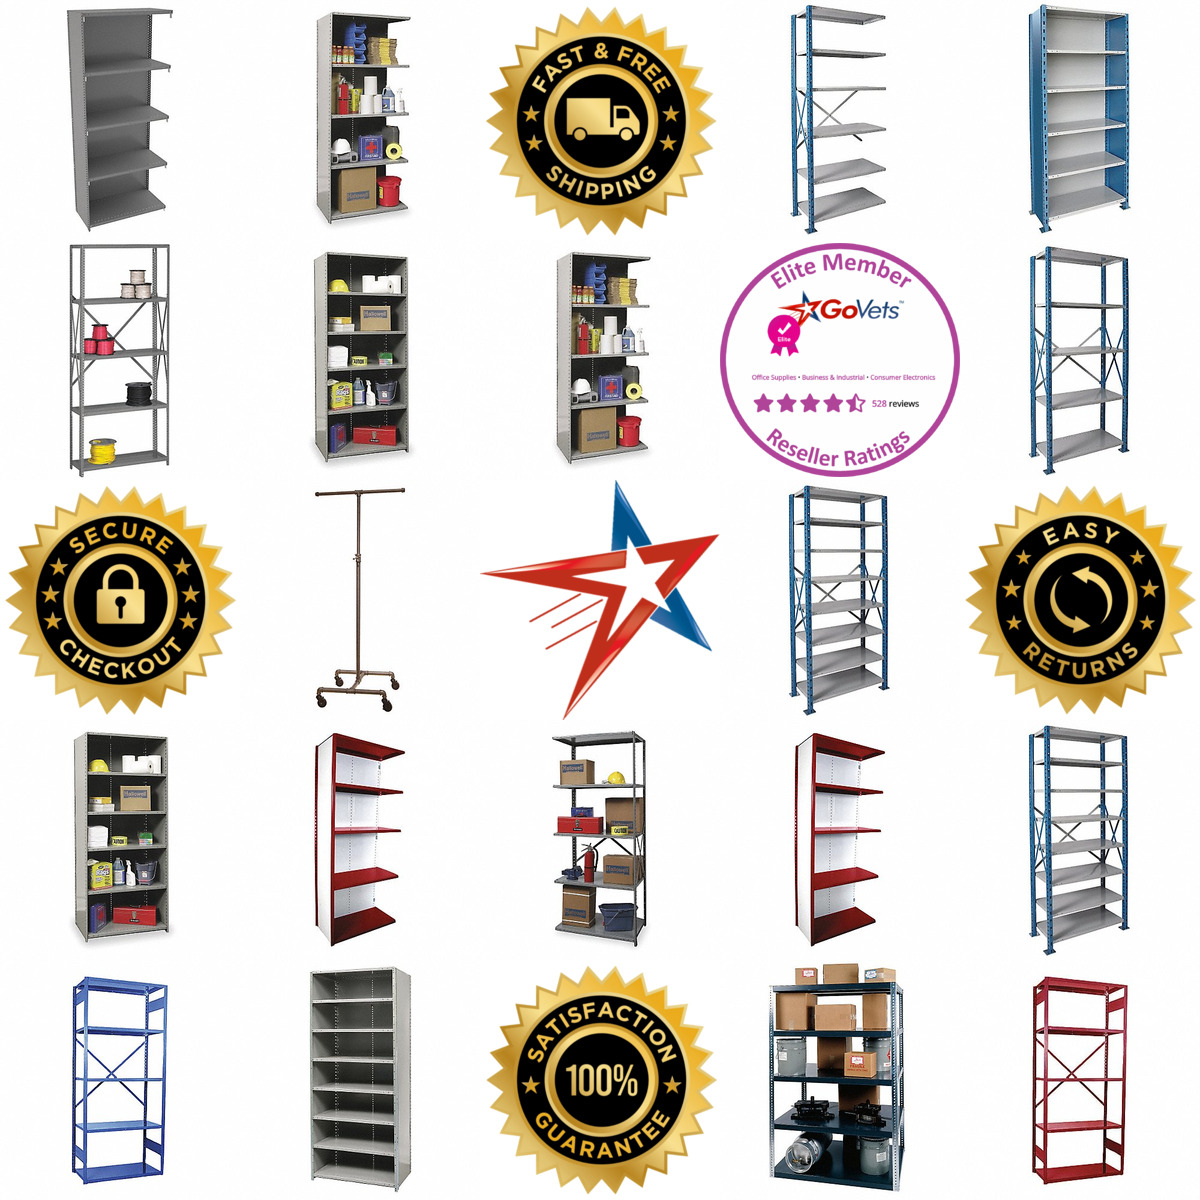 A selection of Freestanding Stationary Metal Shelving products on GoVets